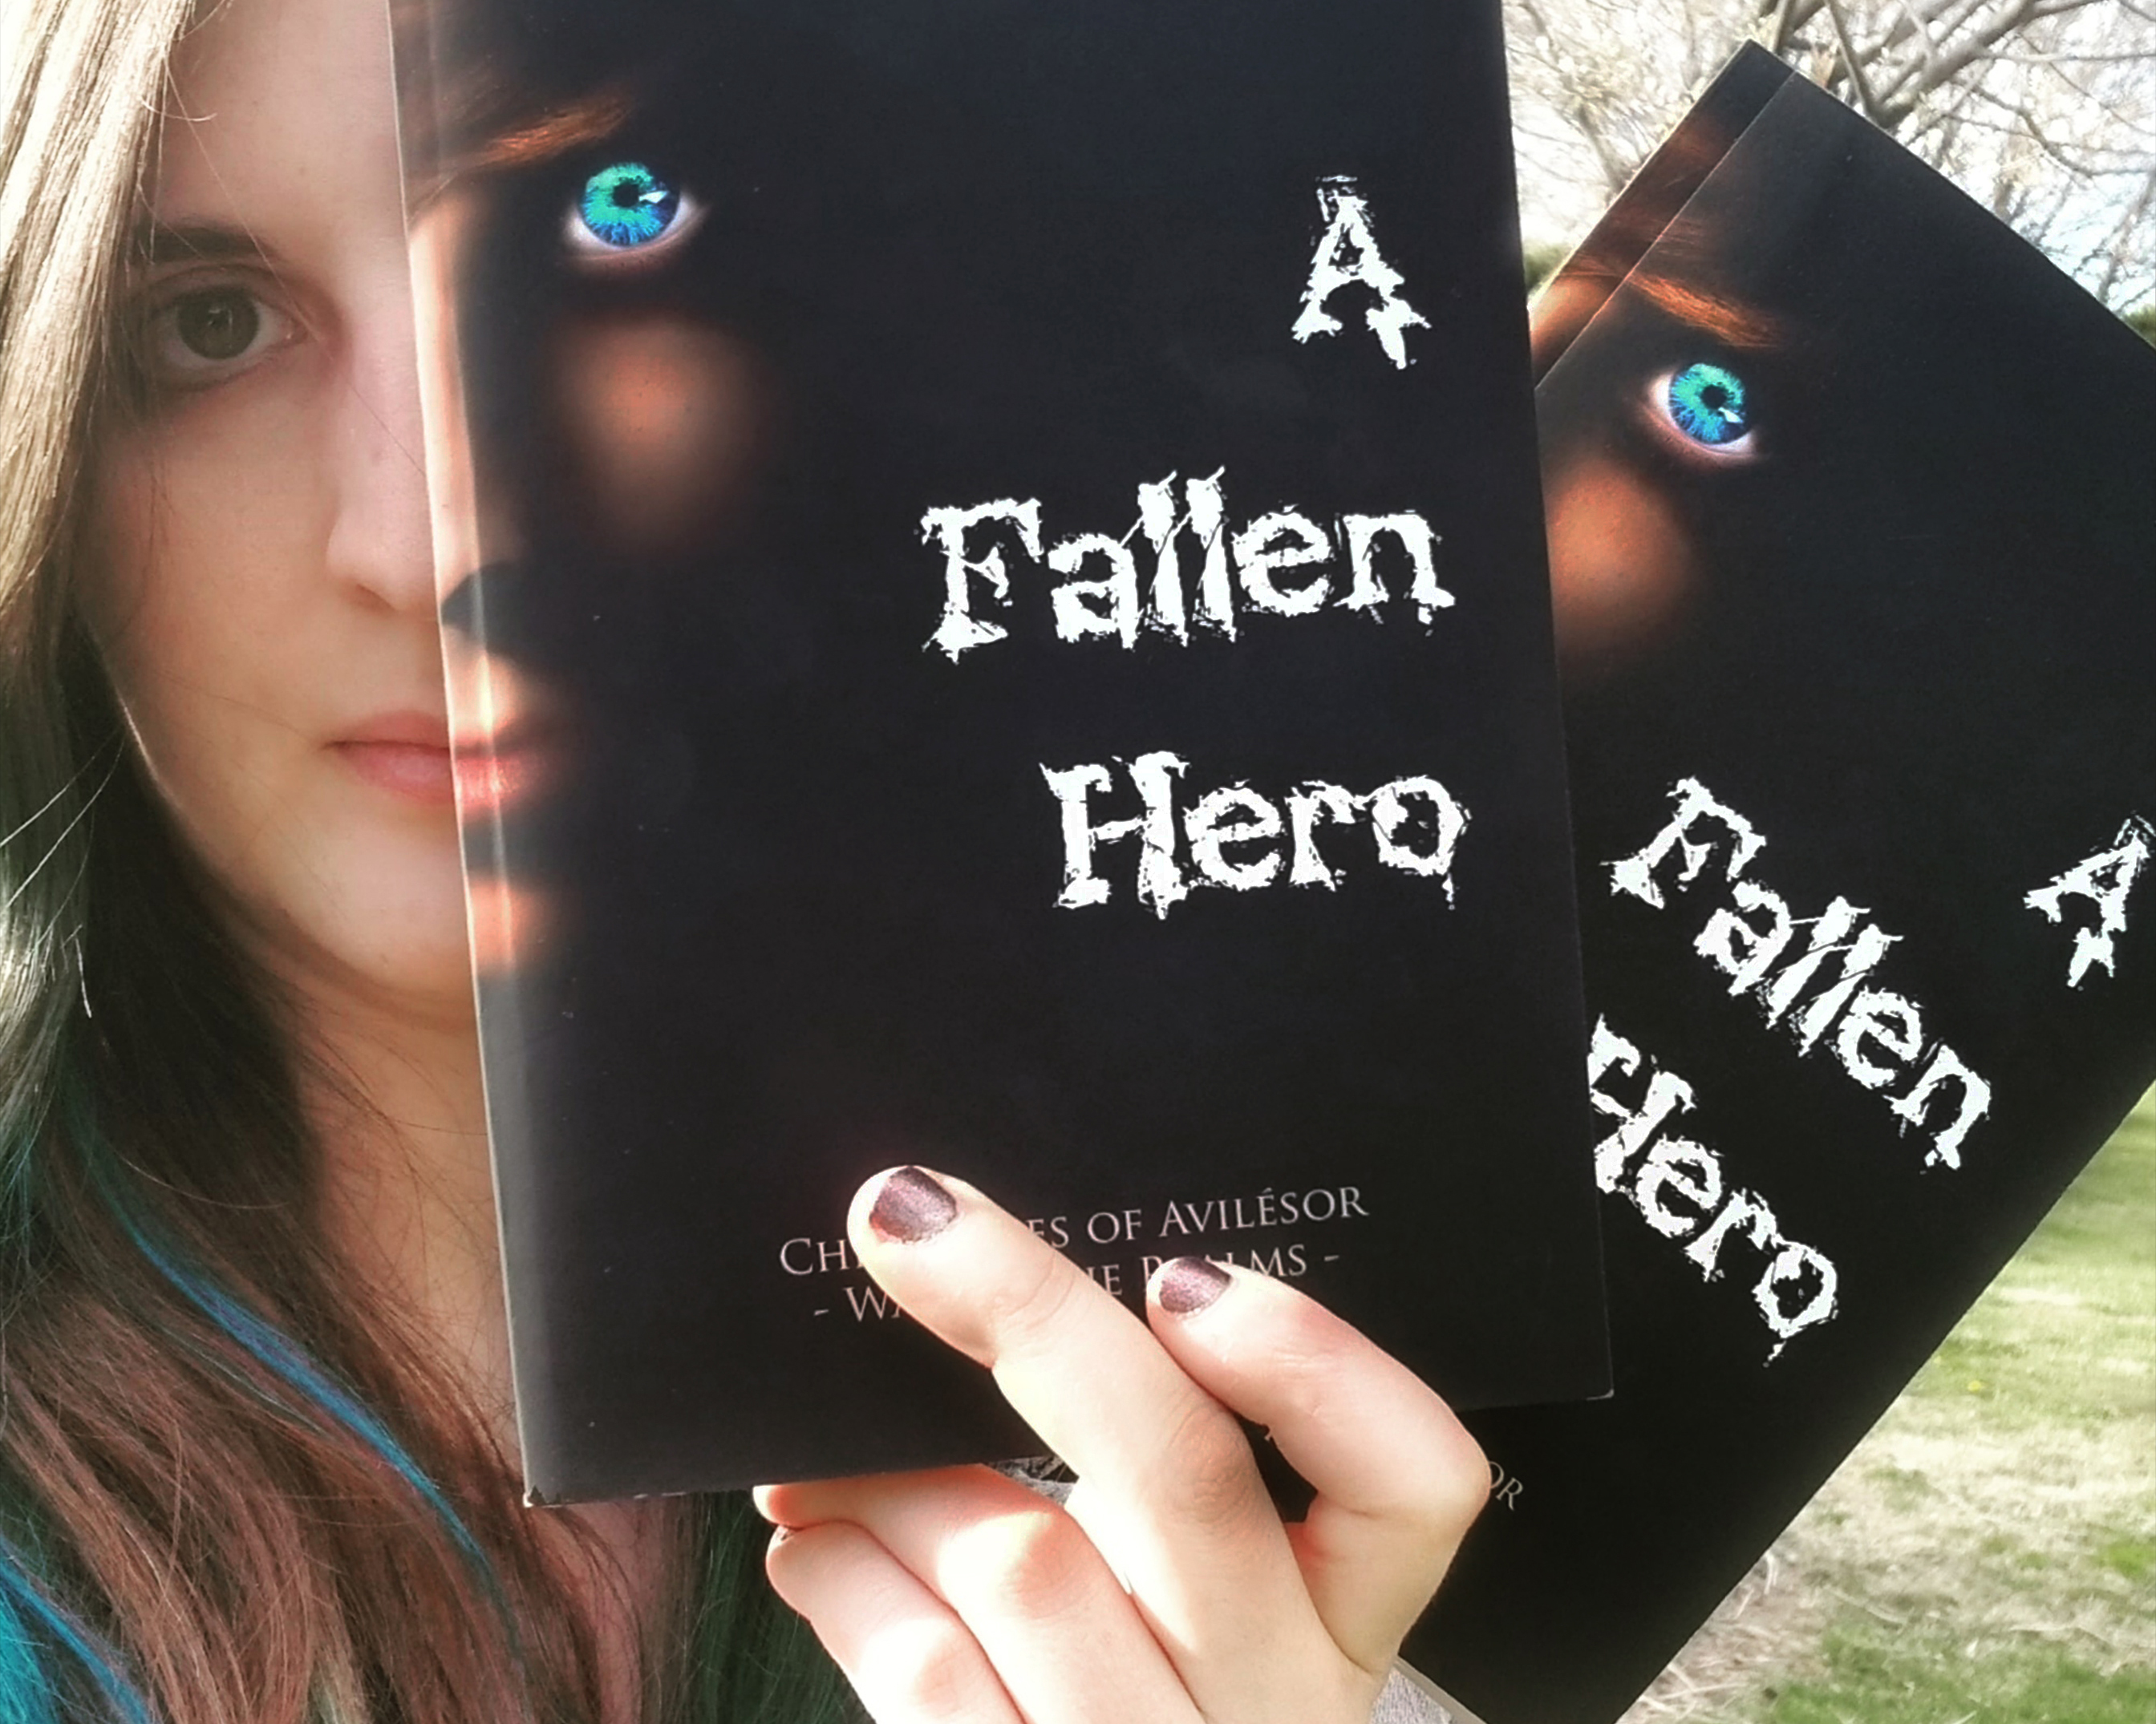 Author Sara A. Noë holding copies of A Fallen Hero published by IngramSpark and Barnes & Noble Press